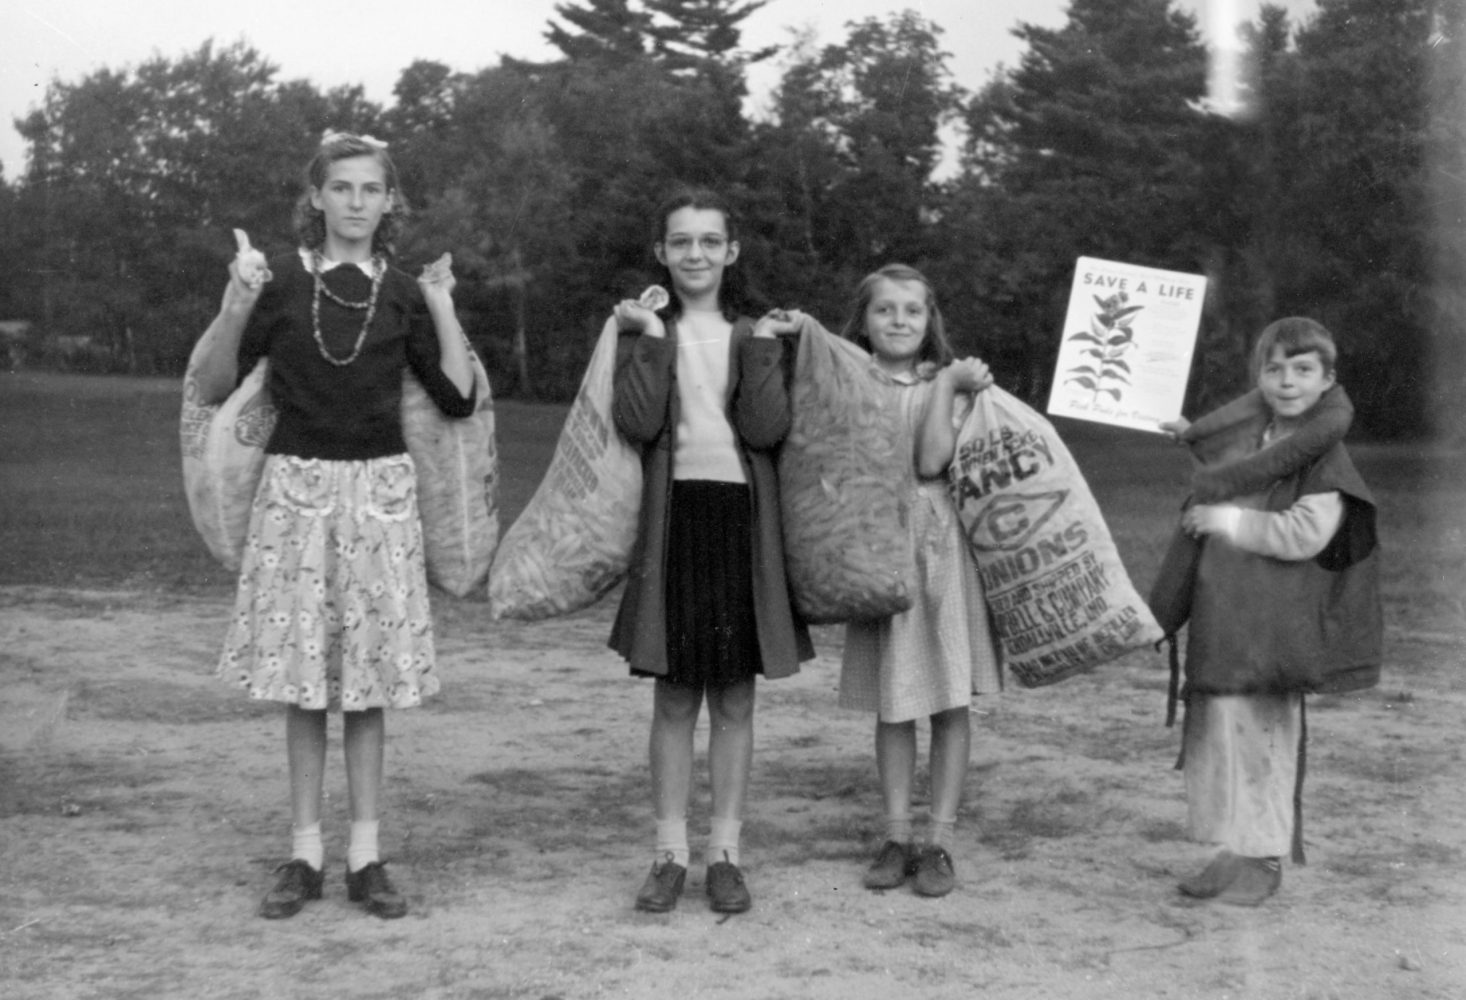 These village school children from Gilford, NH harvested 140 bags of pods
Milkweed Pod Collection Program Scrapbook, 1944 UA 10/7/9
Milne Special Collections and Archives
University of New Hampshire Library, Durham, NH, USA.